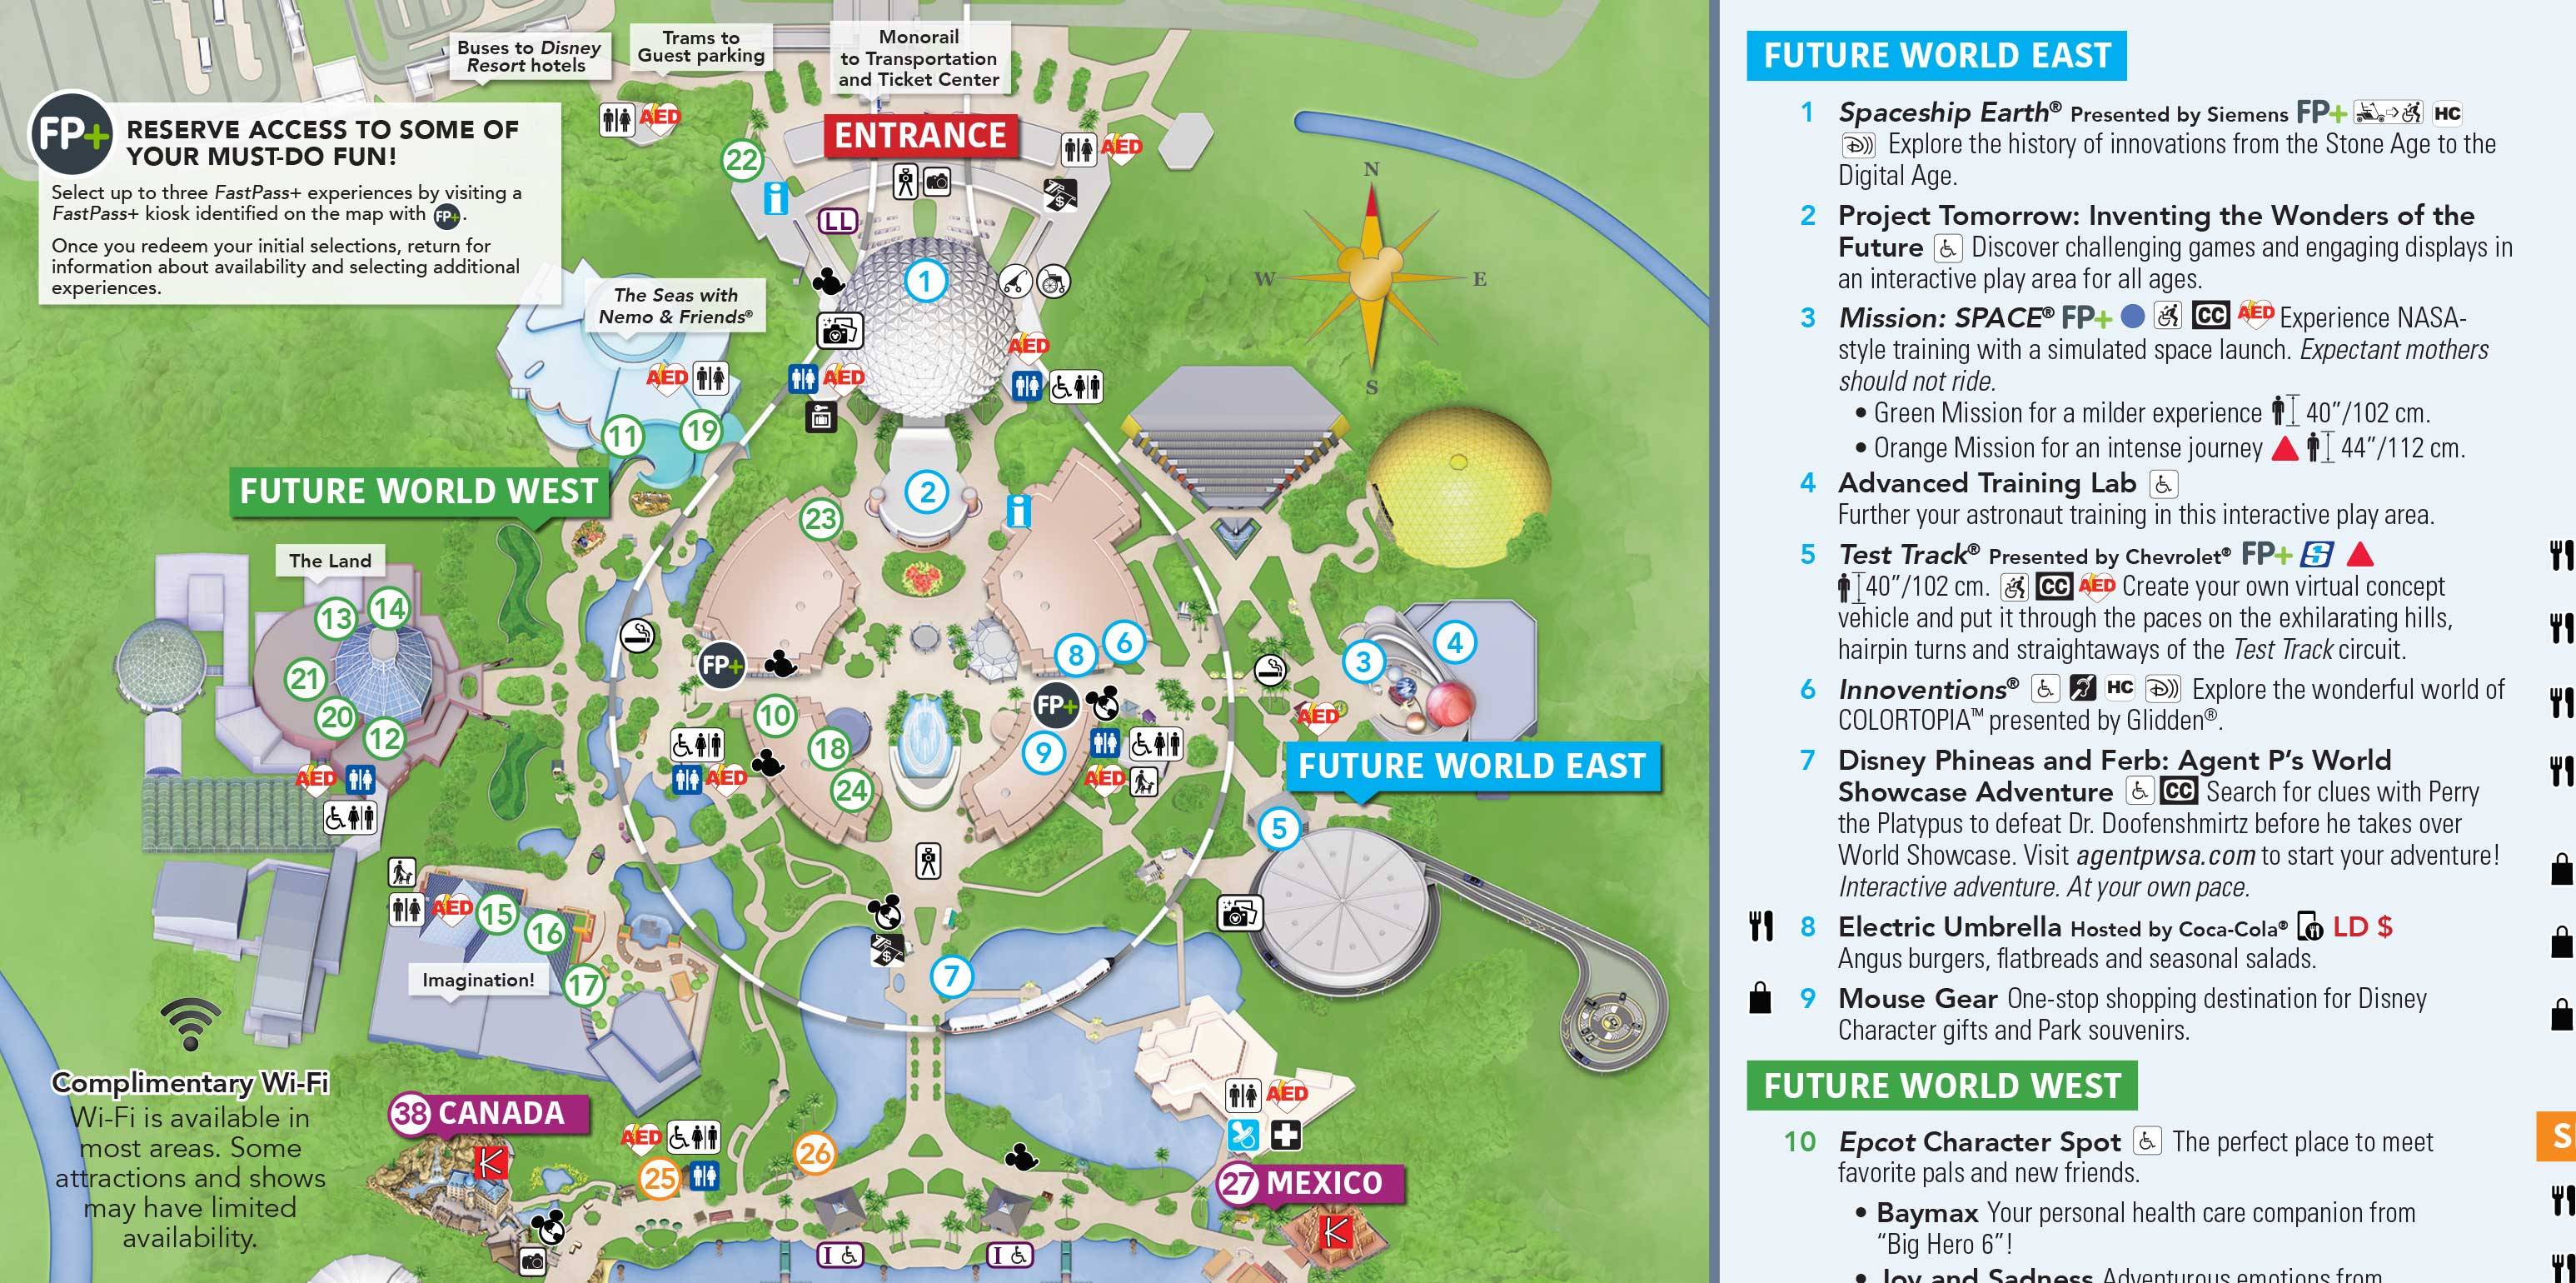 February 2018 Epcot Guide Map